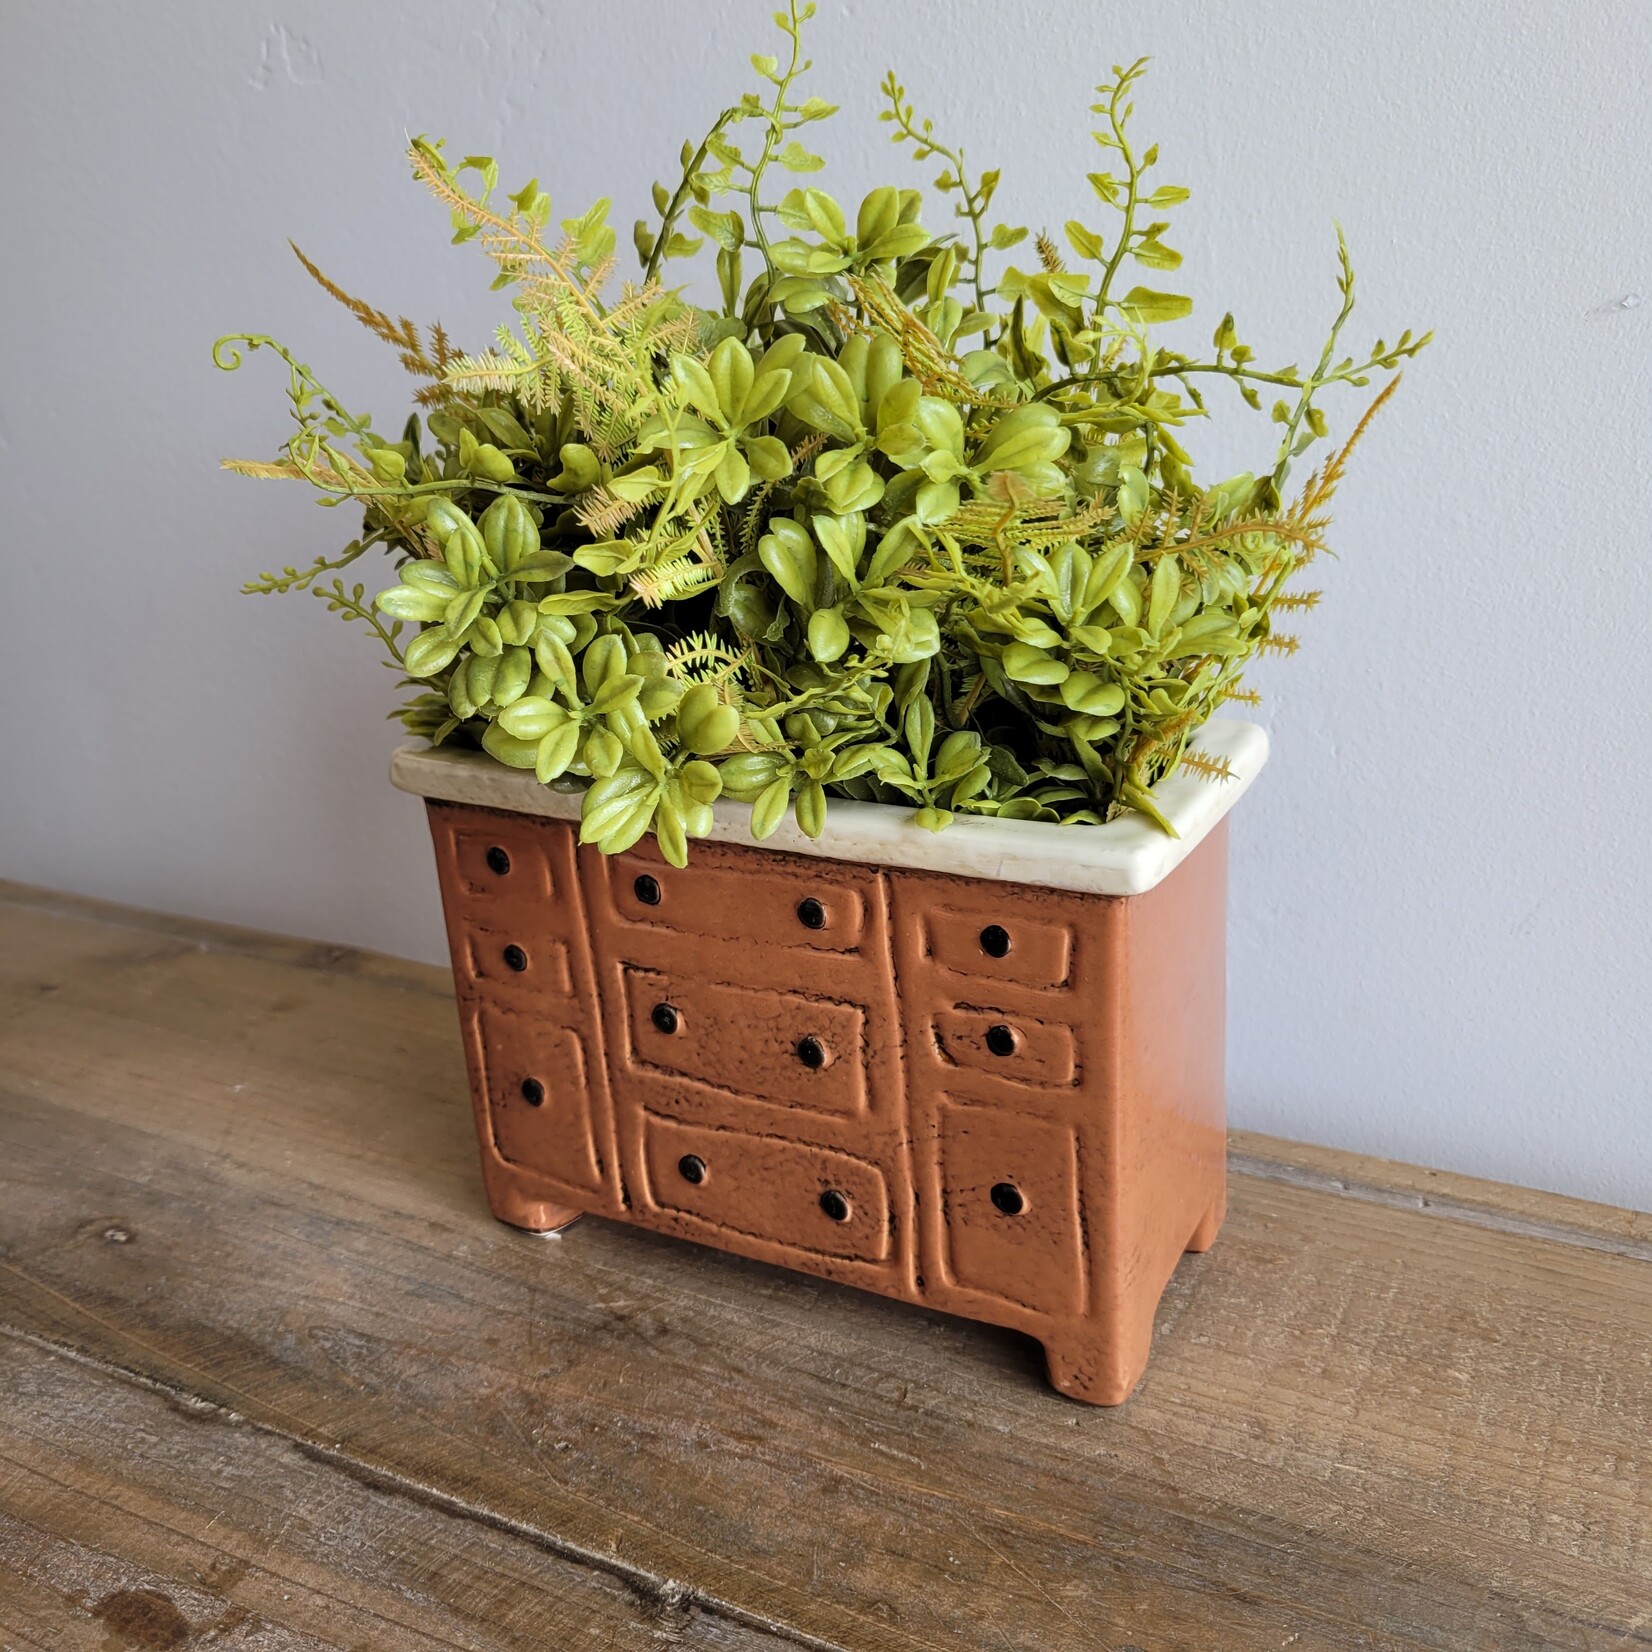 Brown Chest Of Drawers Planter, 5 X 7"